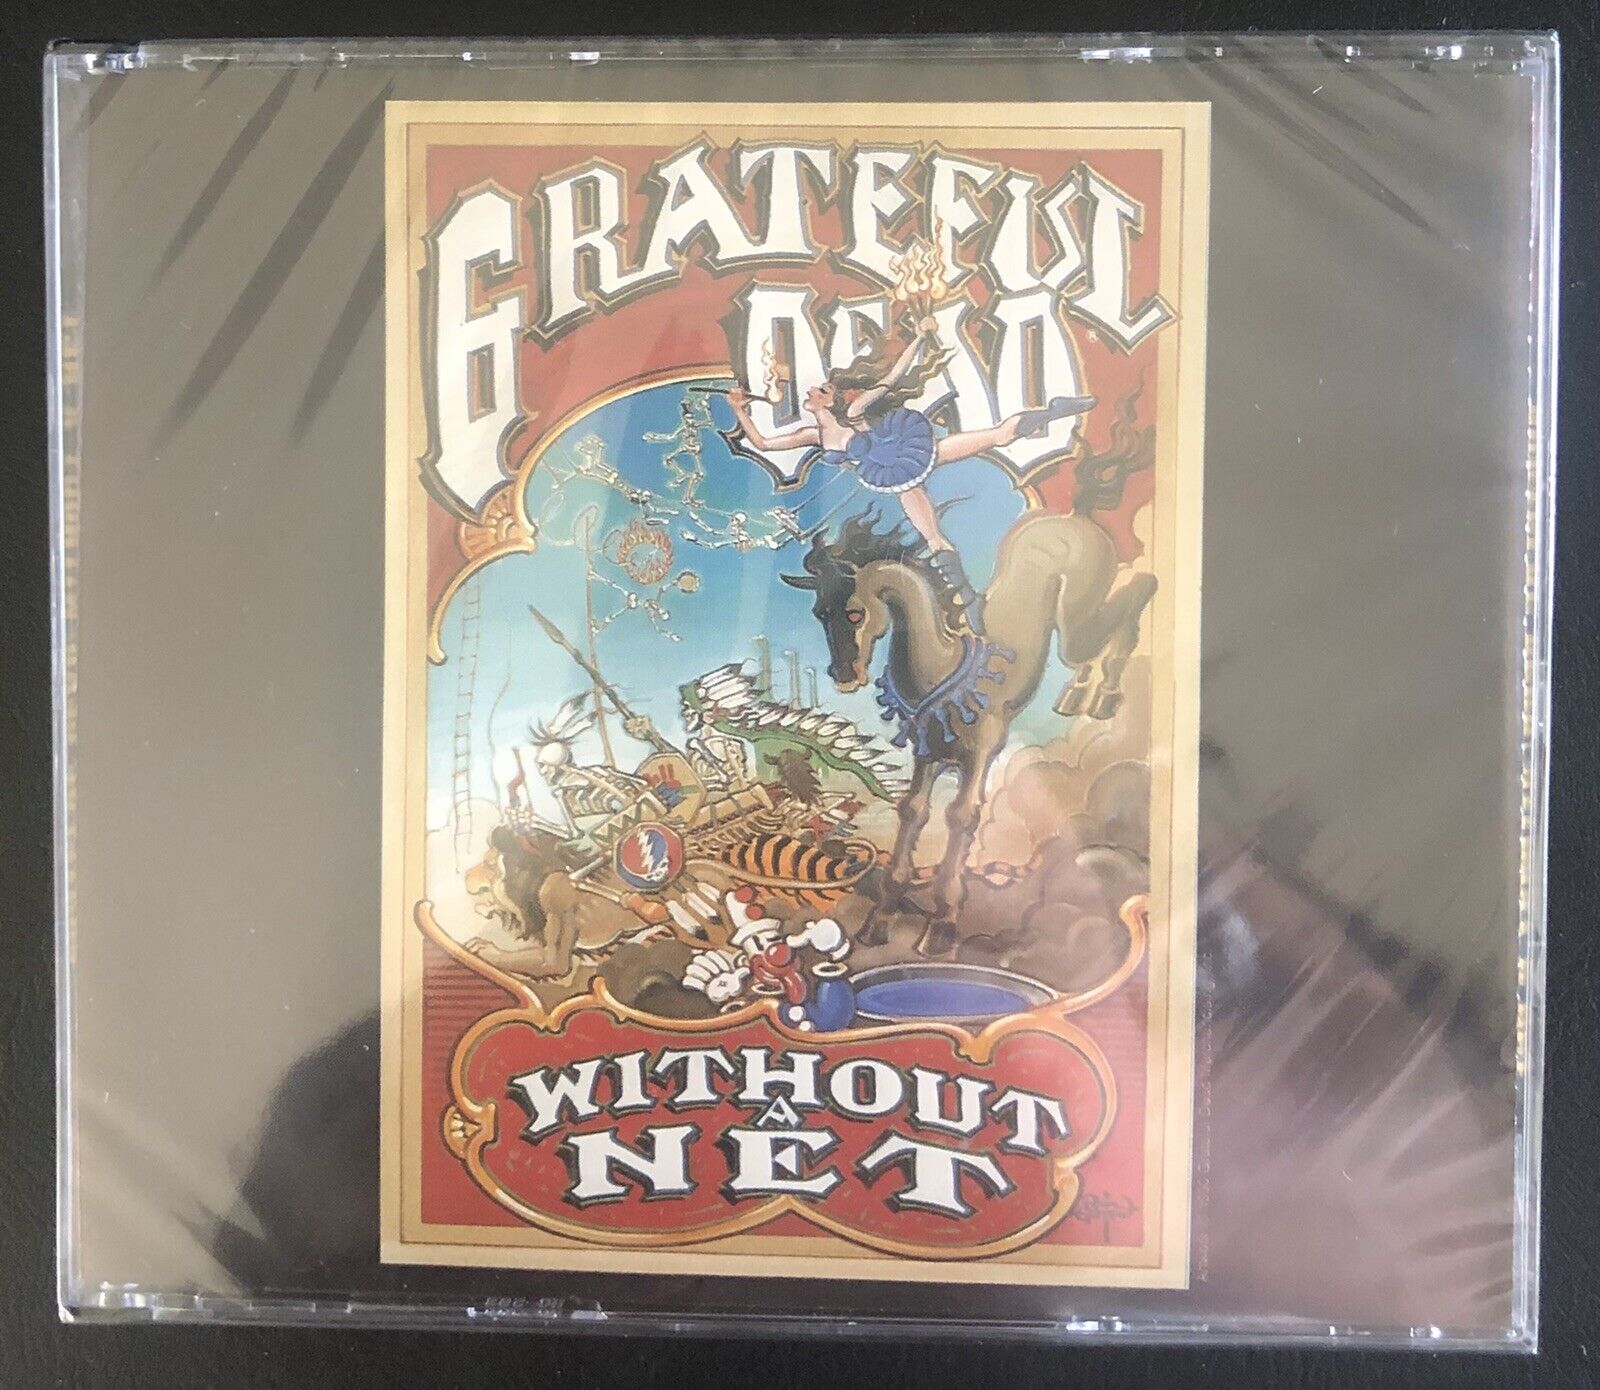 Grateful Dead ‘Without A Net’ 2CD Arista (1980) NEW Rare Fast Shipping